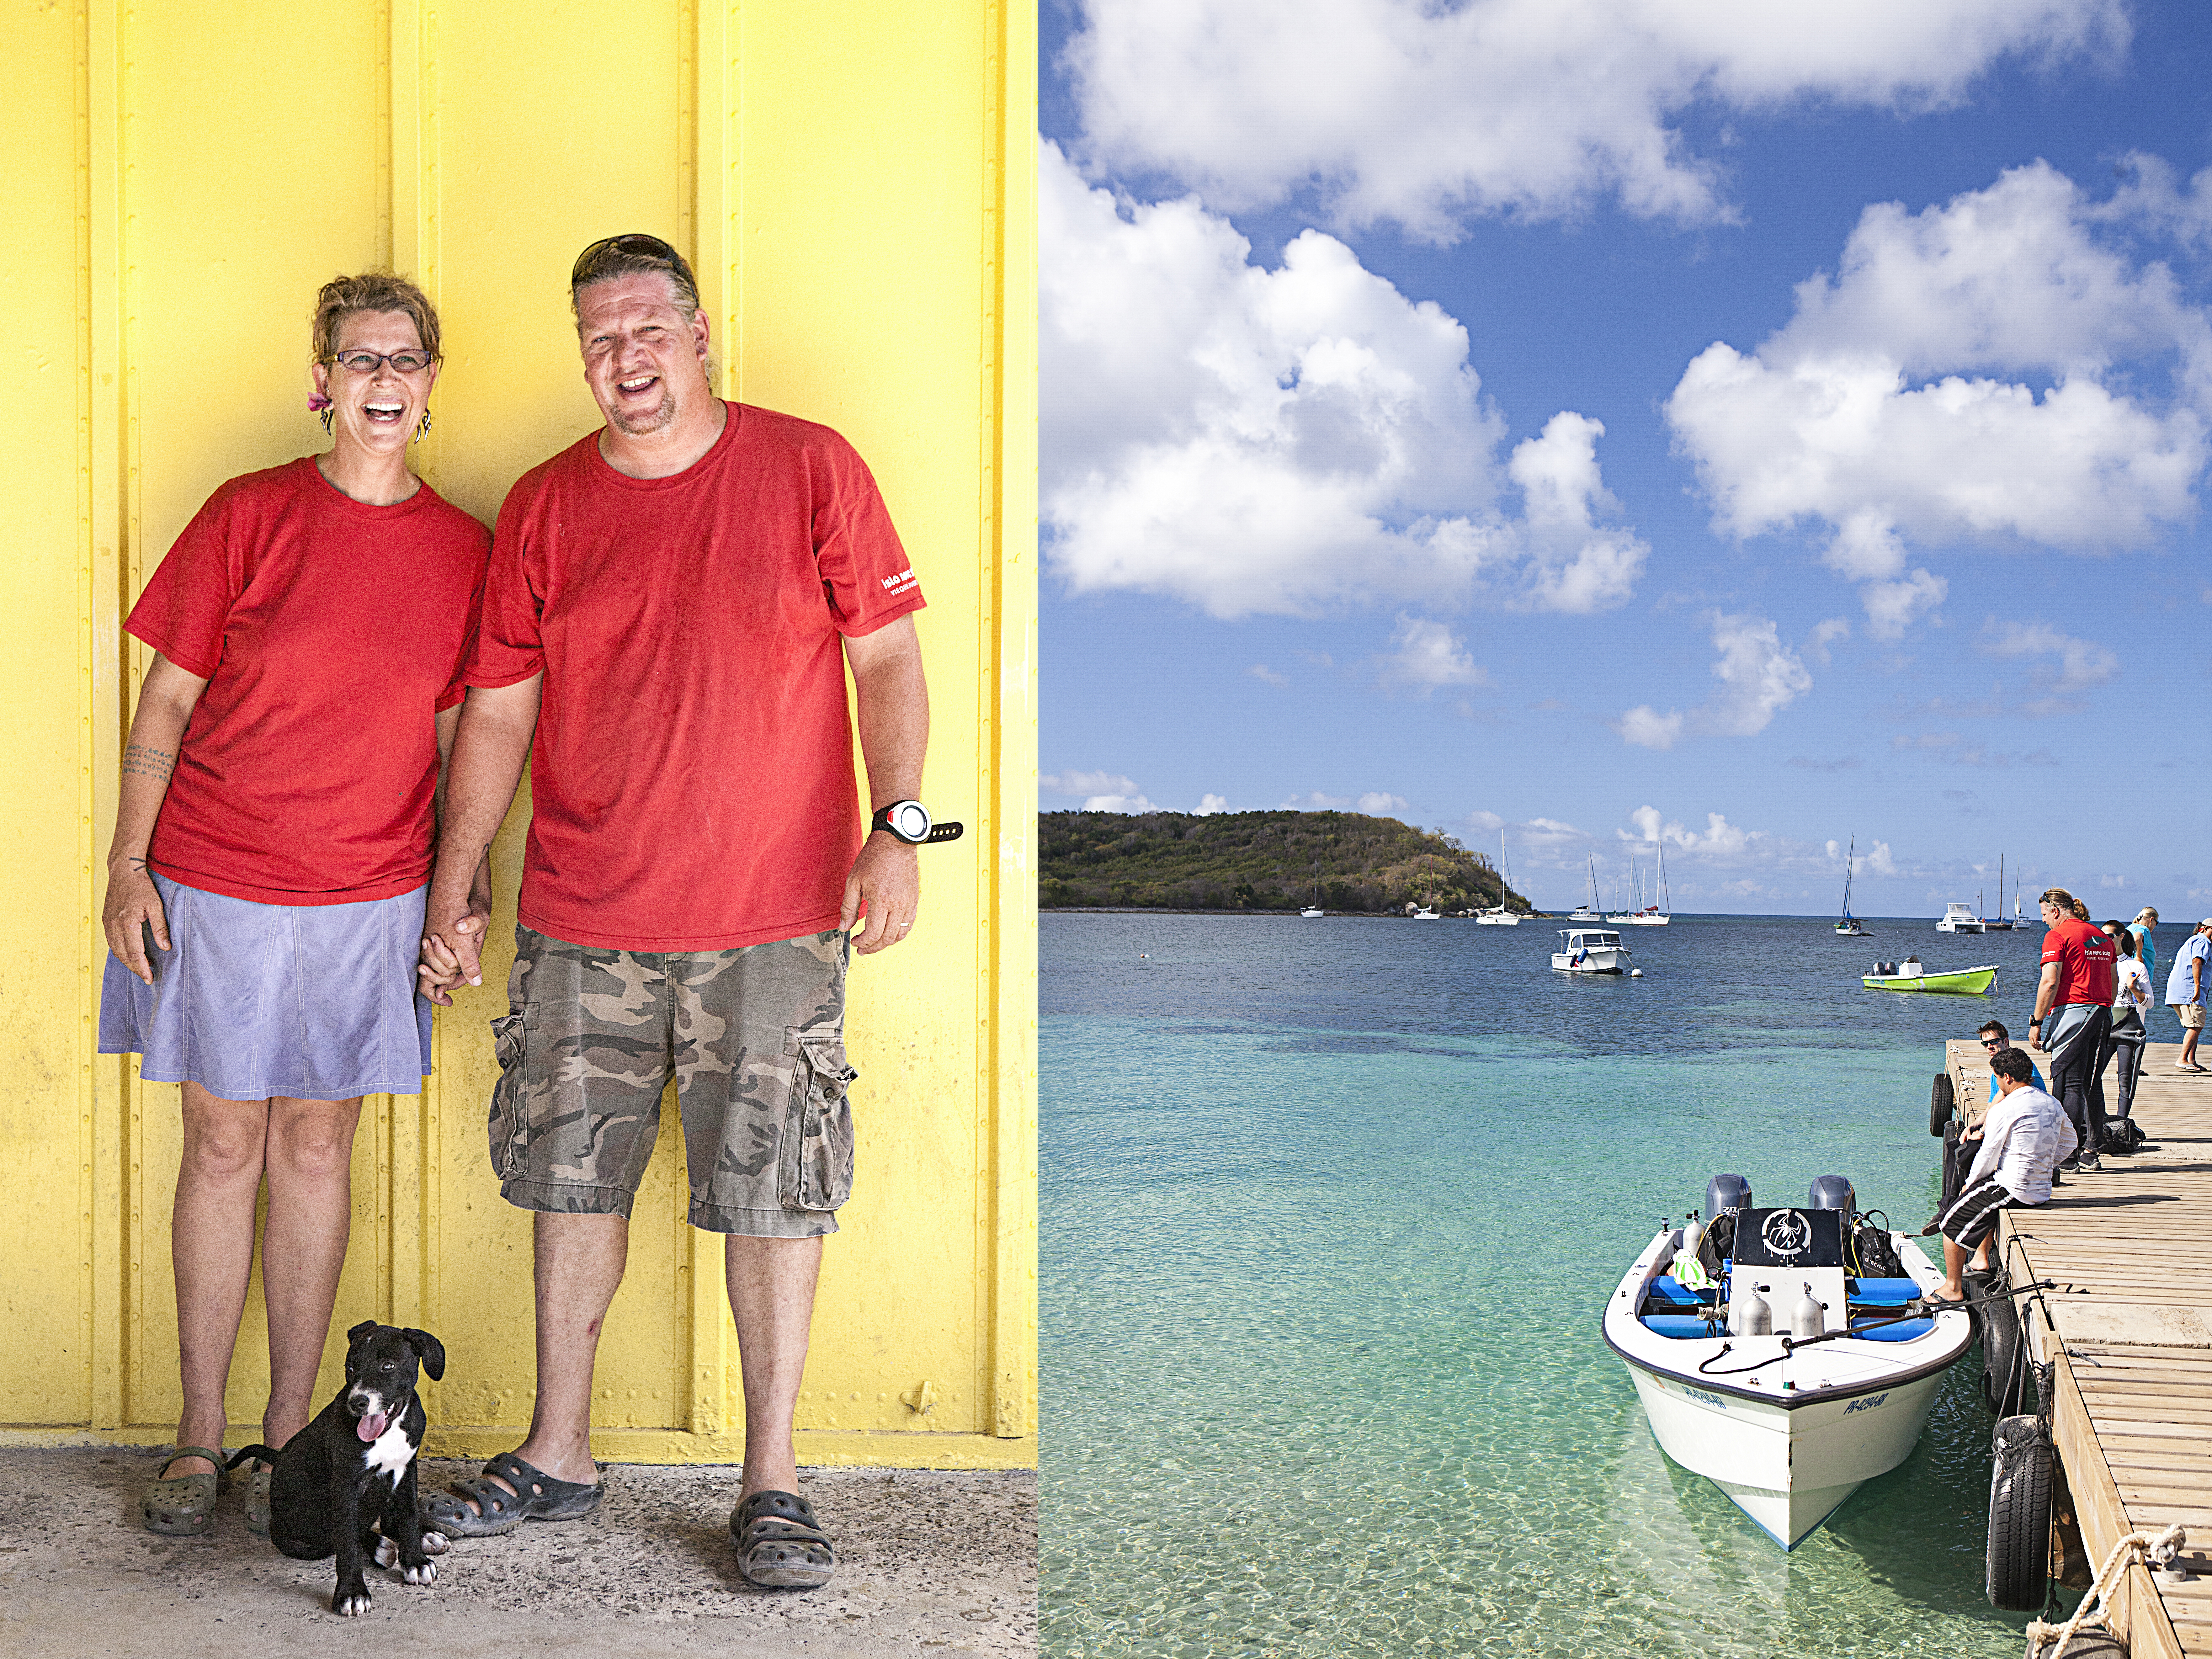 Expats, Move to an Island: Tania and Arnaud